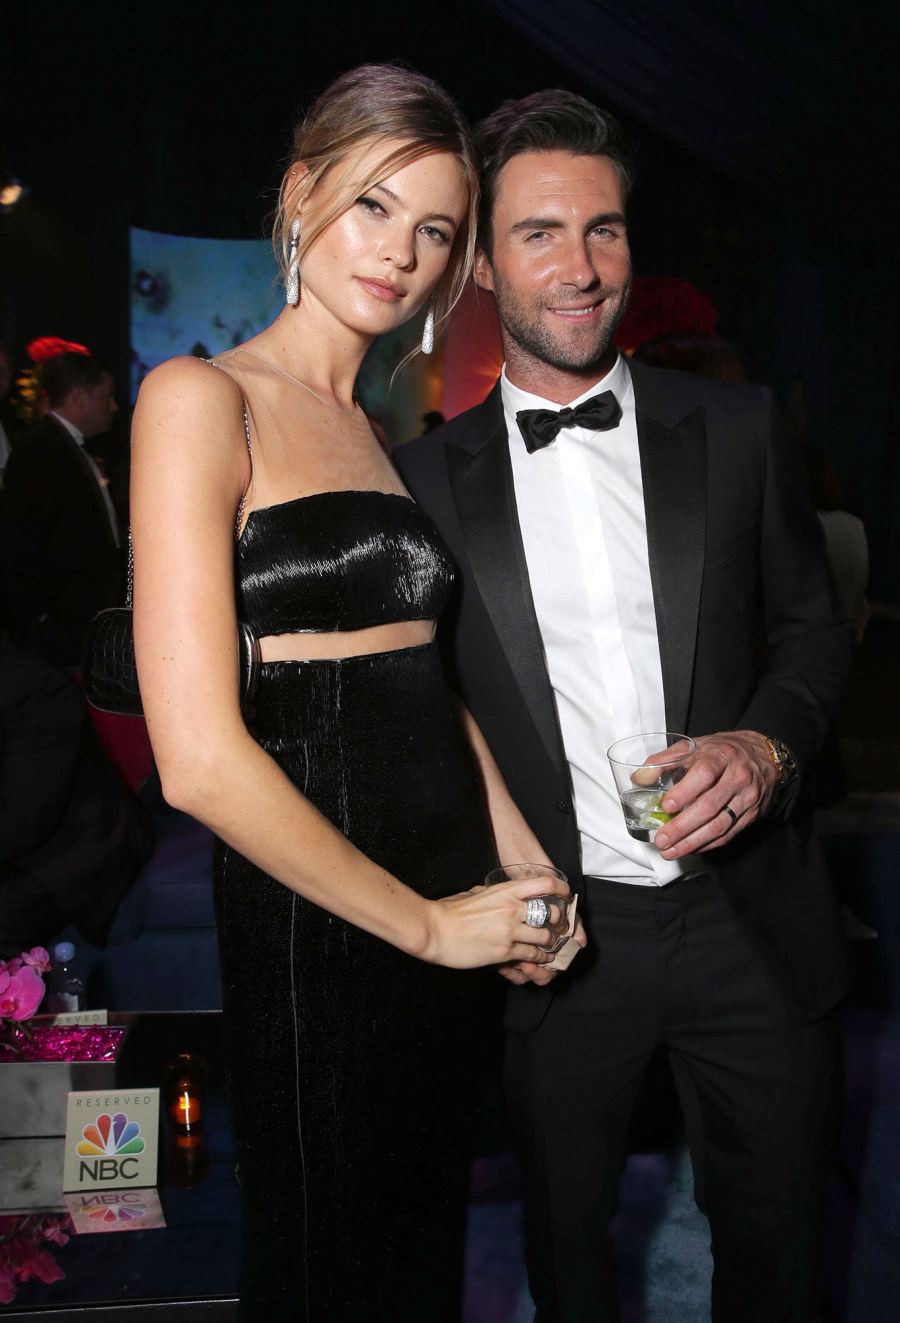 October 2013 Adam Levine Candid Marriage Quotes About Behati Prinsloo Before Cheating Allegations